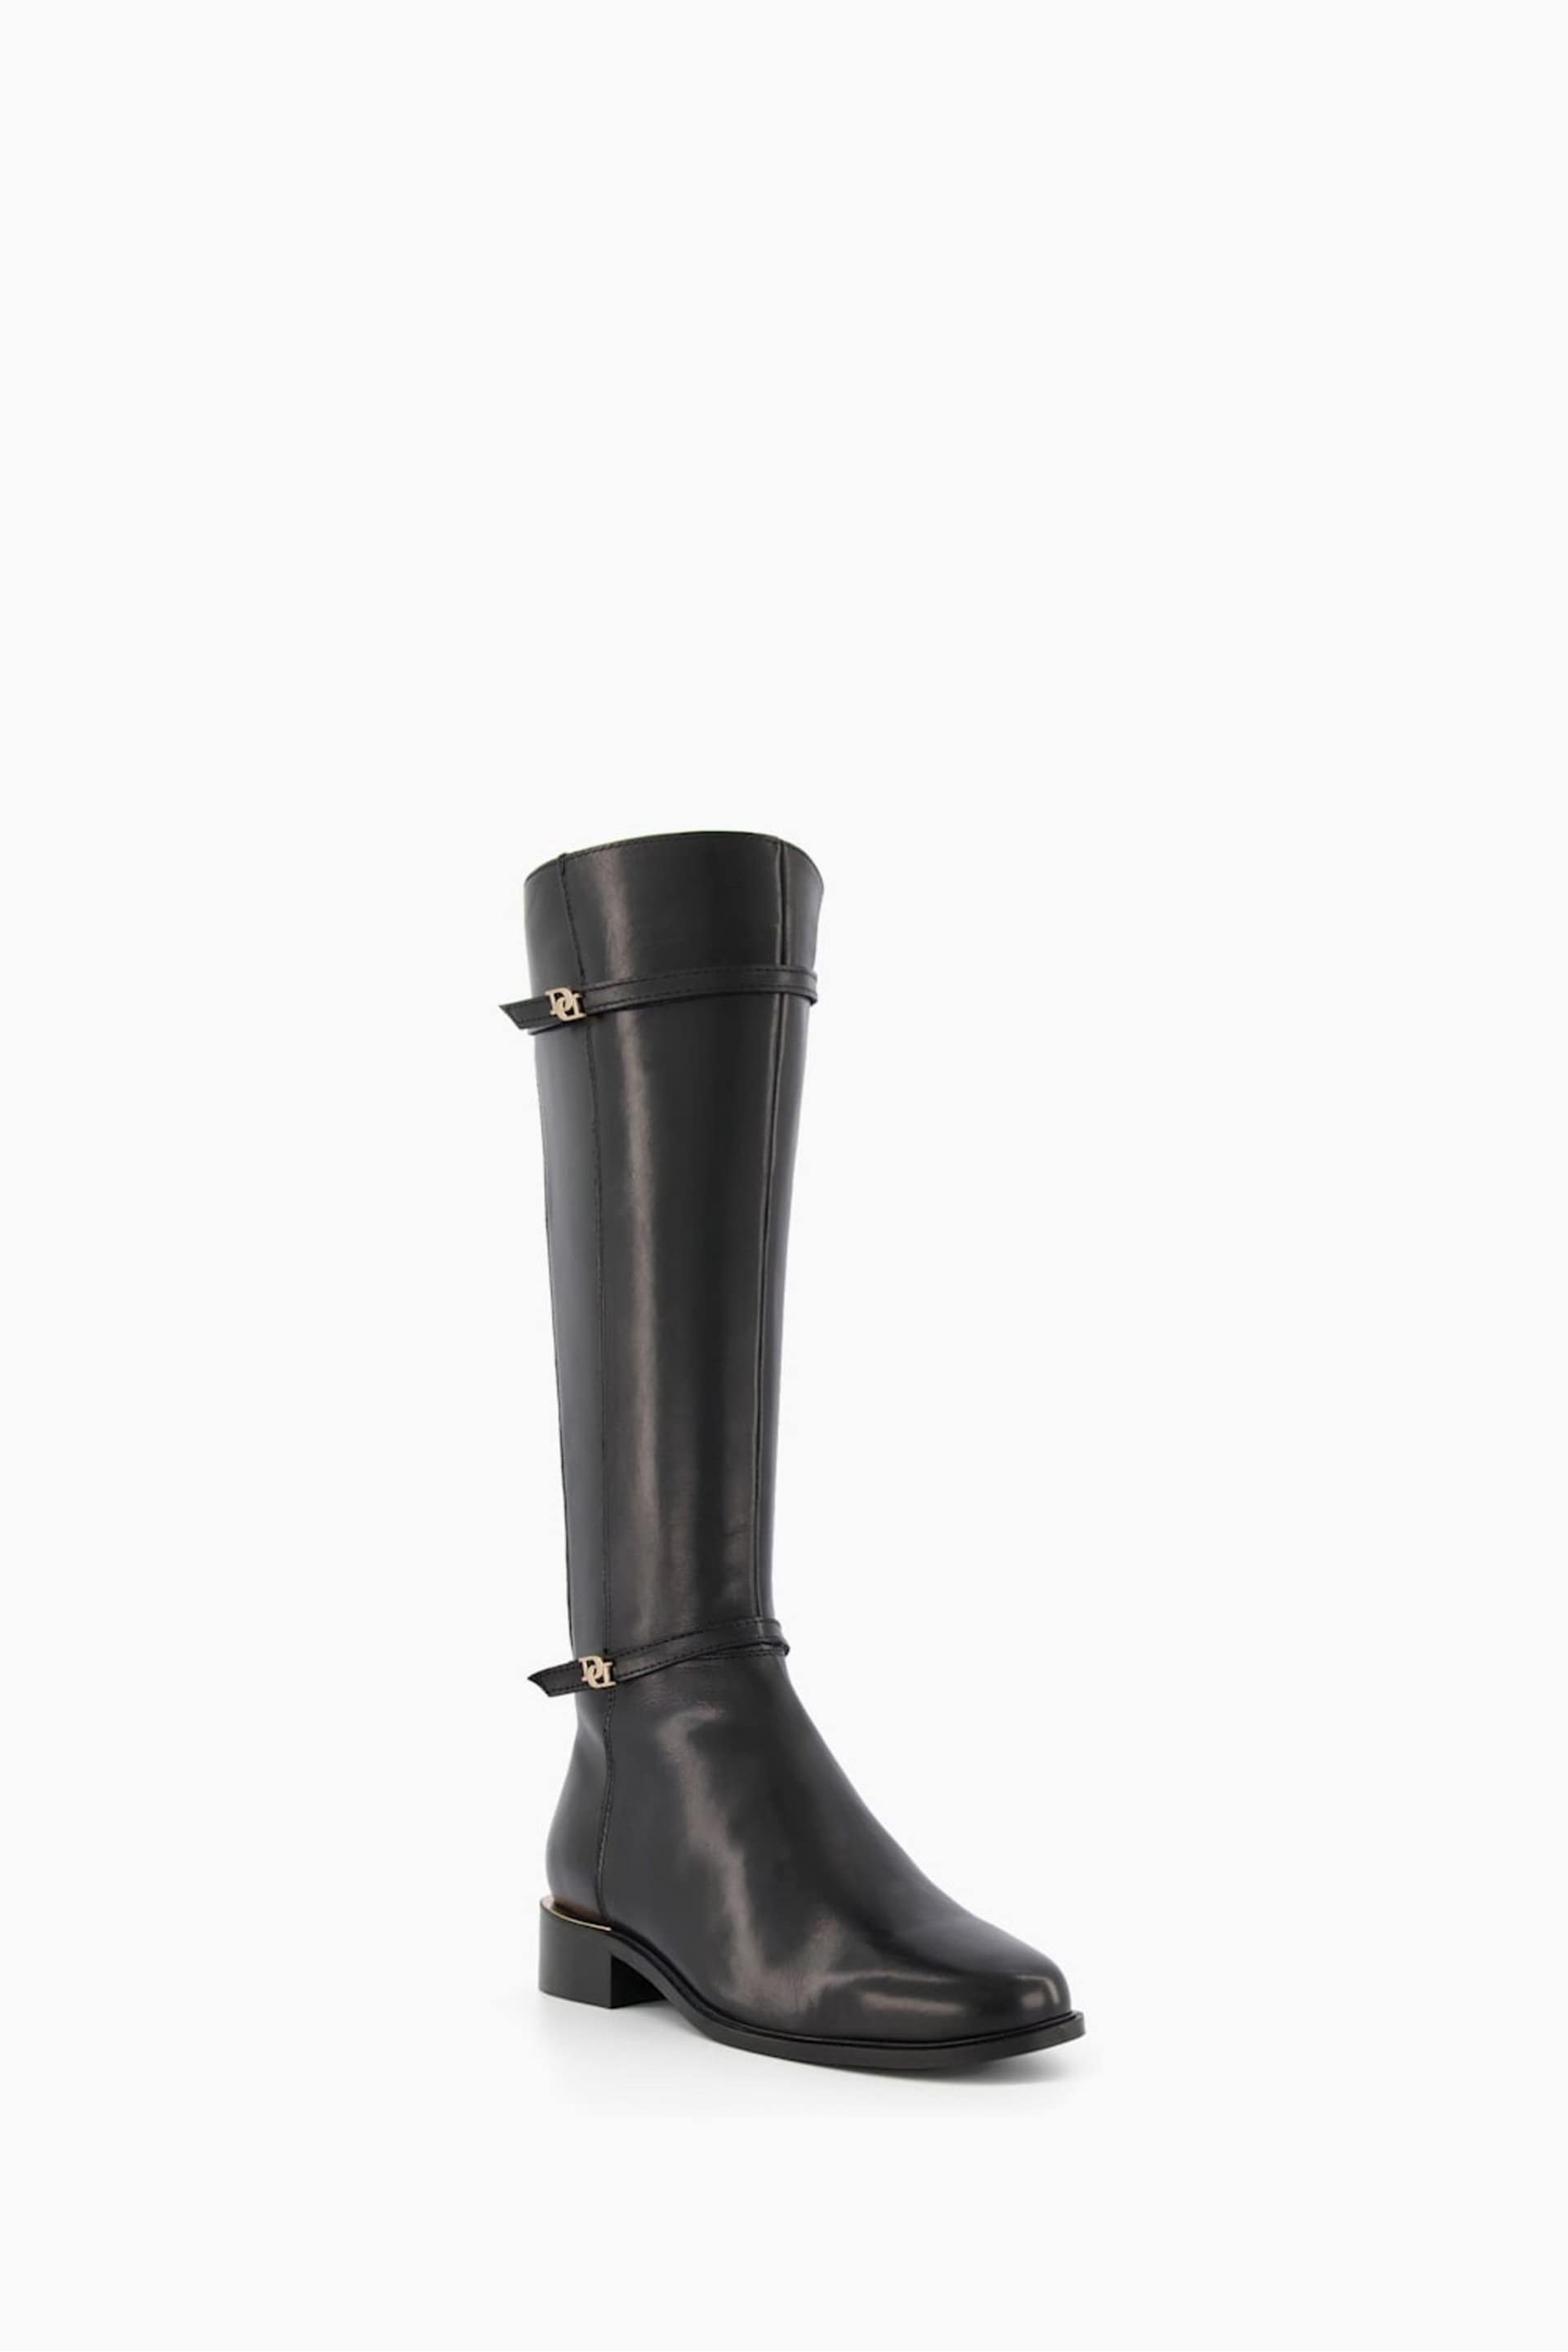 Dune London Black Tap Buckle Trim High Boots - Image 4 of 6